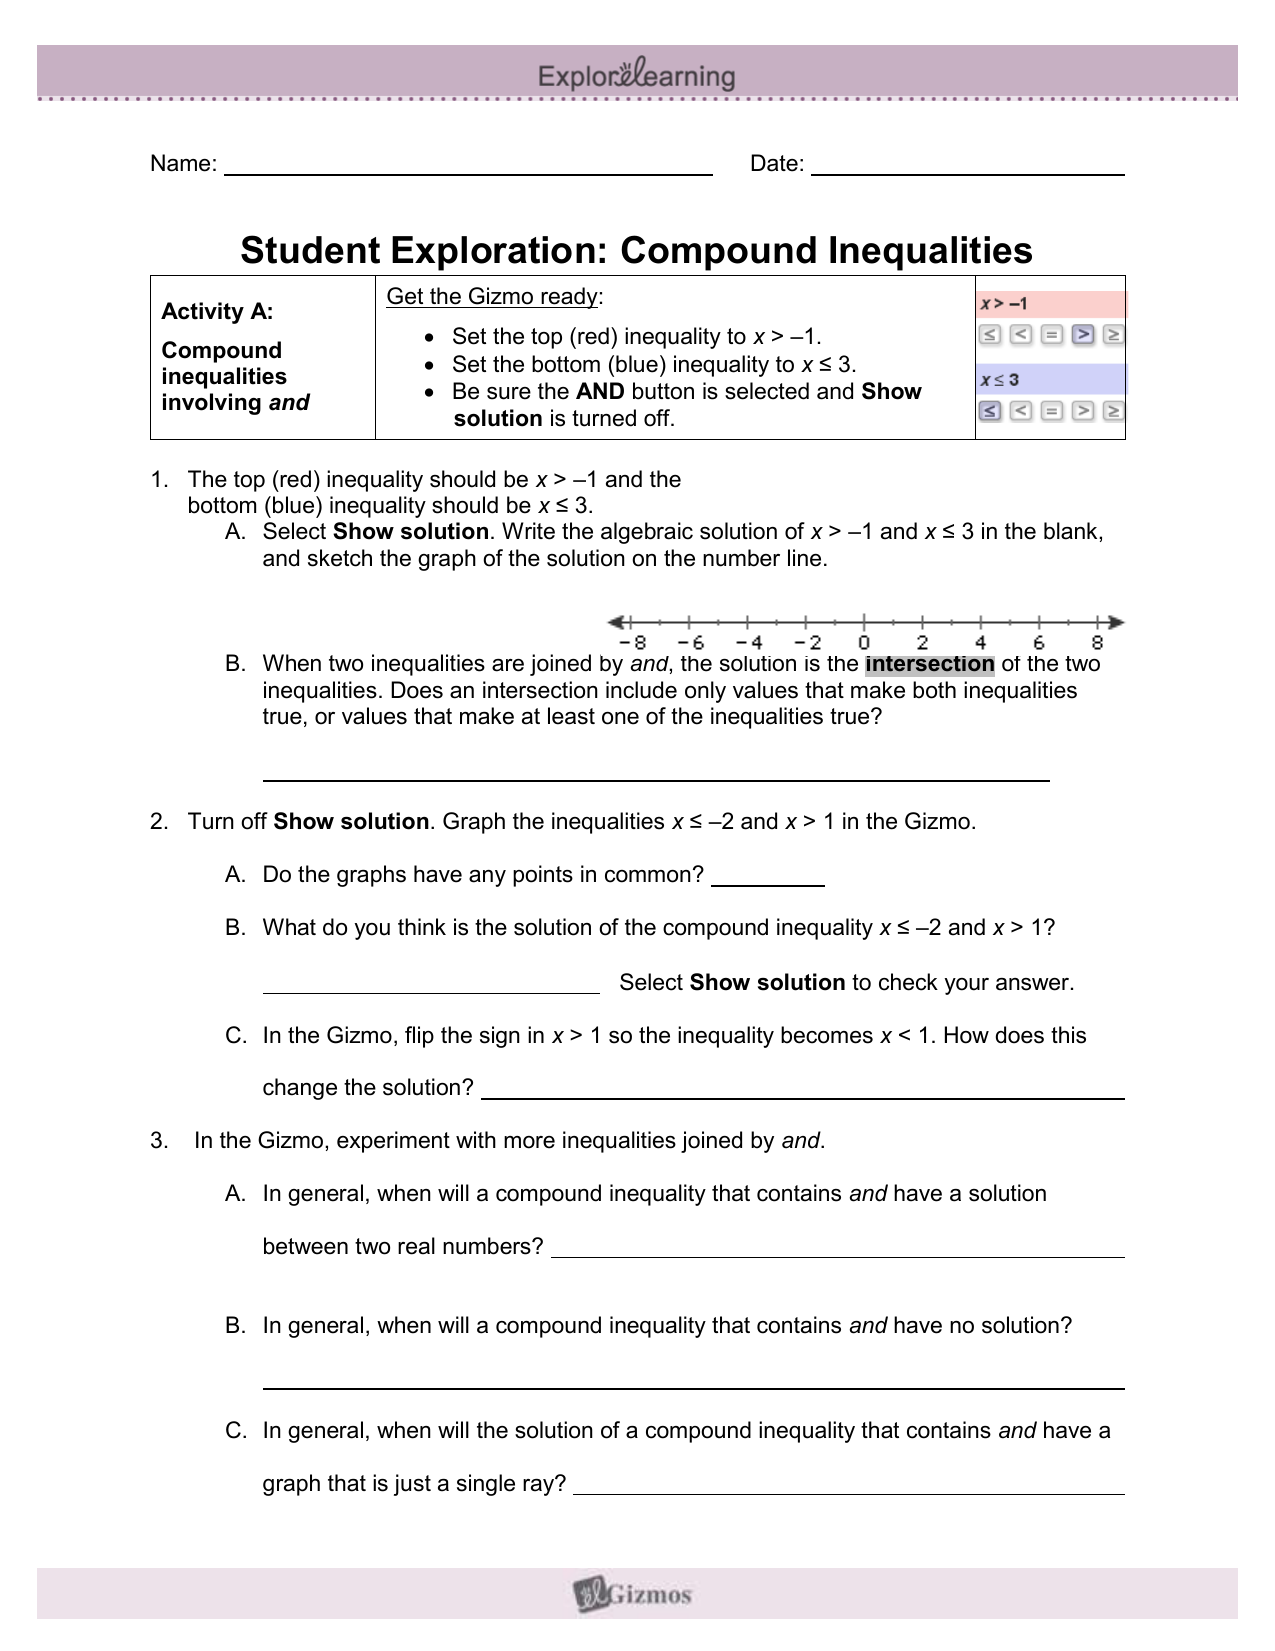 Compound Inequalities Throughout Compound Inequalities Worksheet Answers